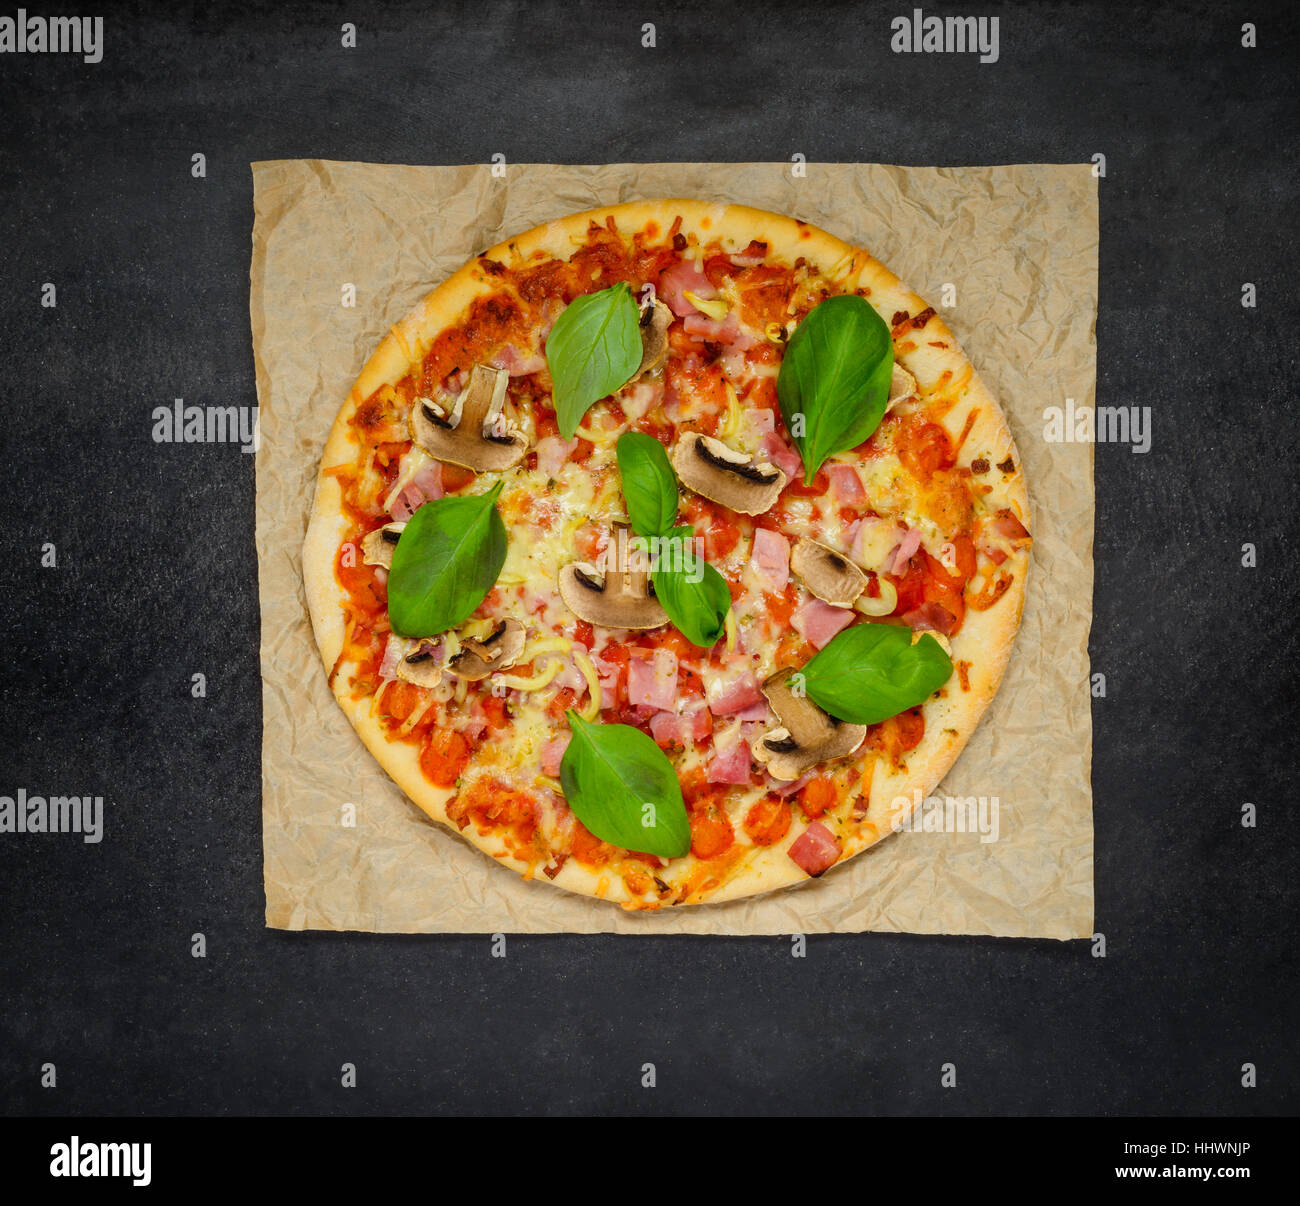 Baked Healty Food Pizza with Mushrooms, cheese and Basil on flatbread Stock Photo